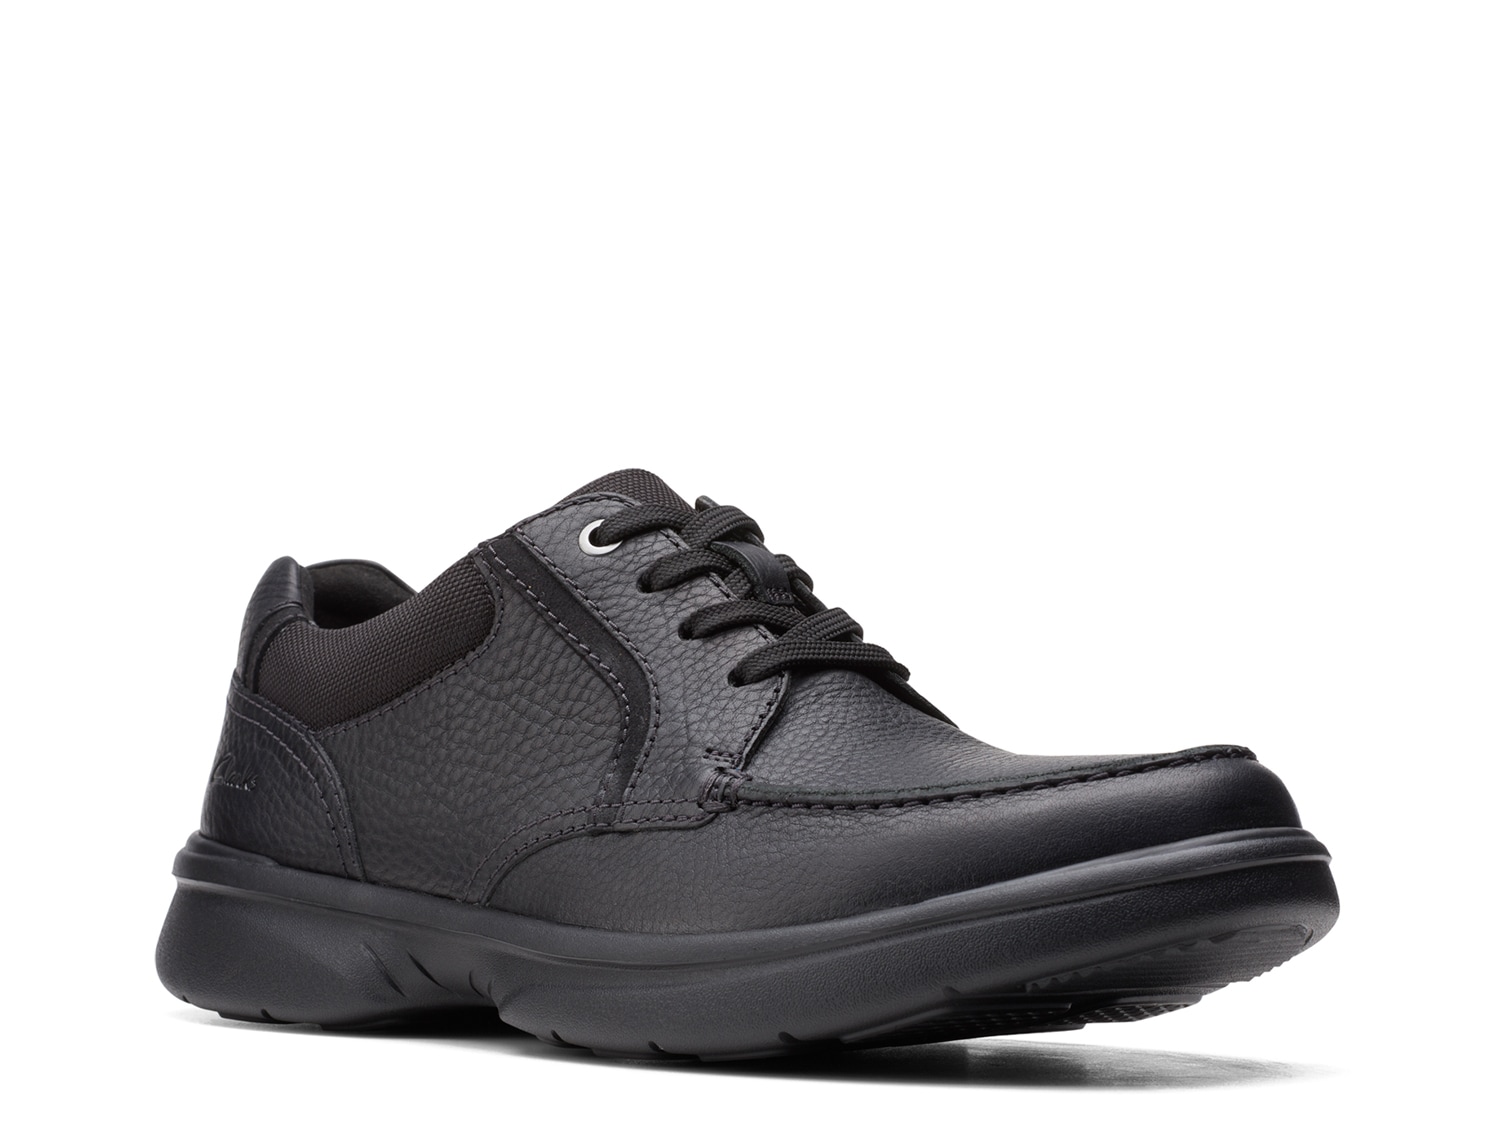 clarks extra wide mens shoes